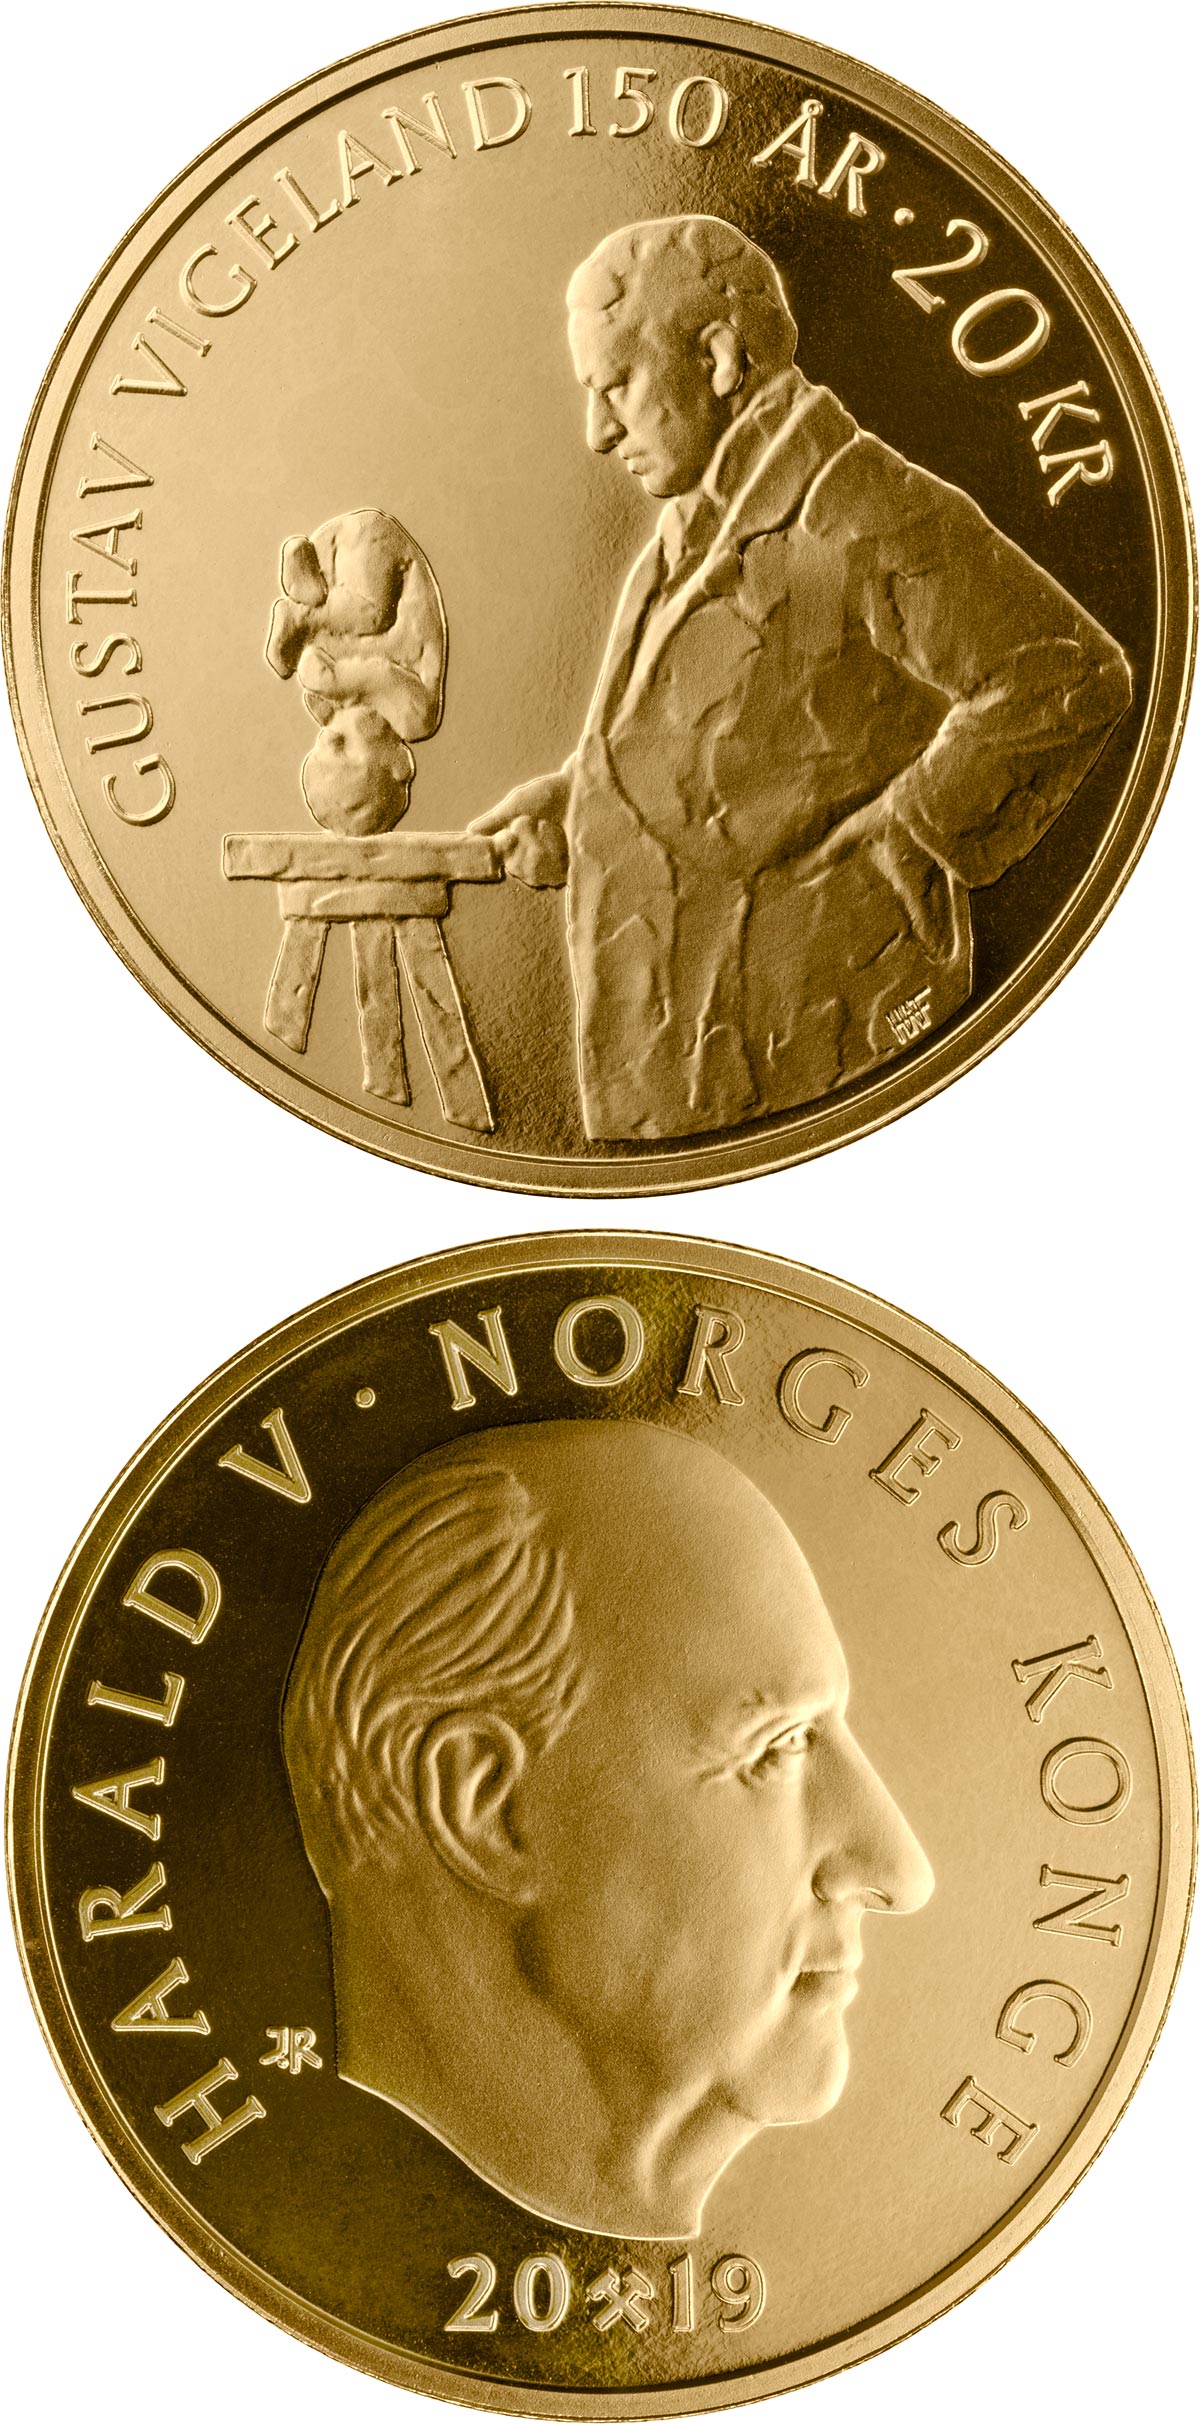 Image of 20 krone coin - Gustav Vigeland | Norway 2019.  The Nordic gold (CuZnAl) coin is of BU, UNC quality.